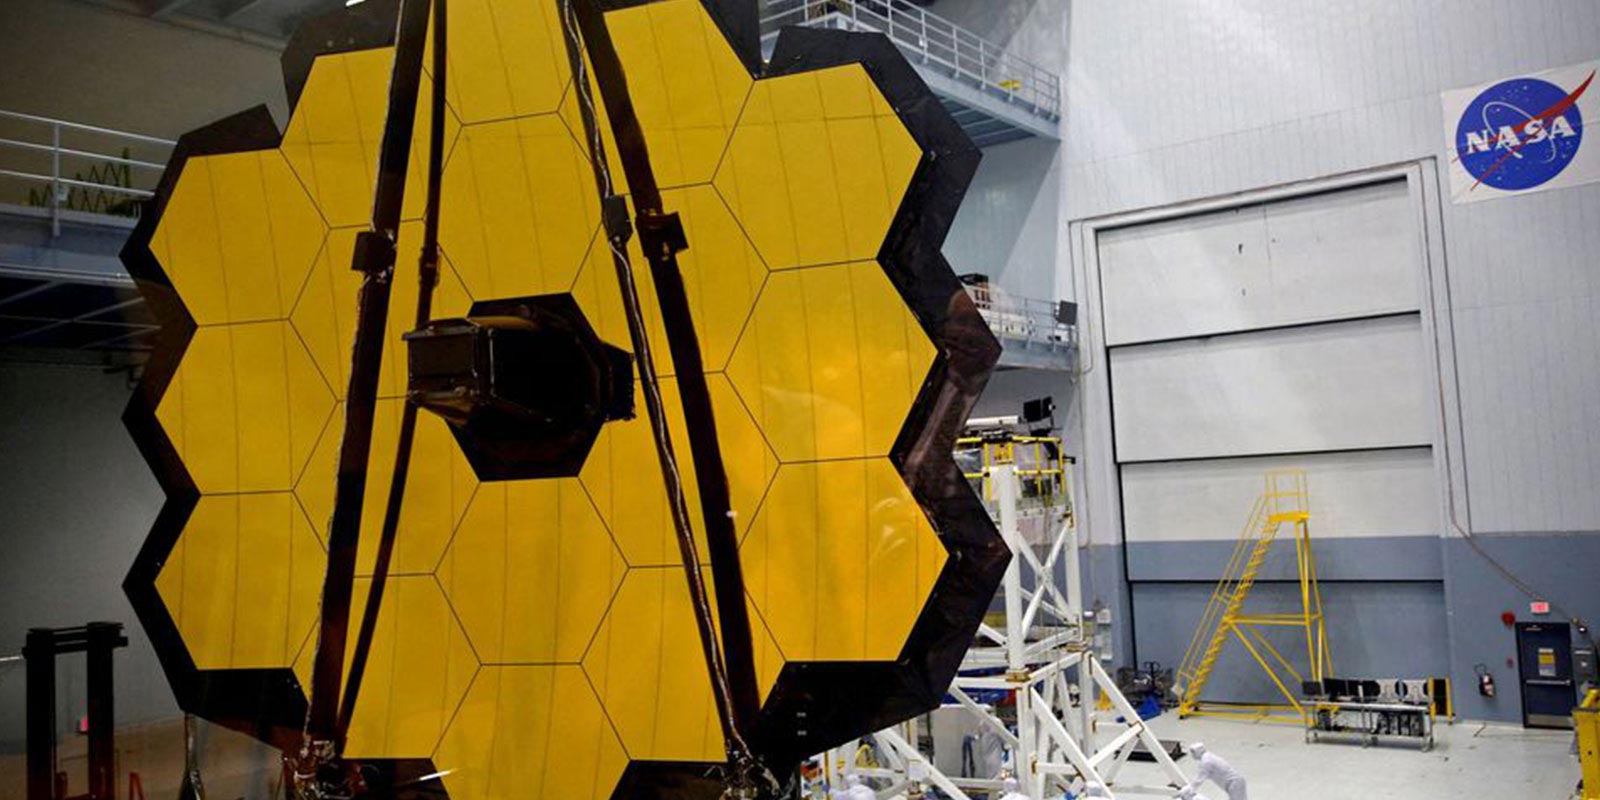 Is The James Webb Space Telescope A New Era Of Space Exploration Or A Quest For A Habitable Planet?